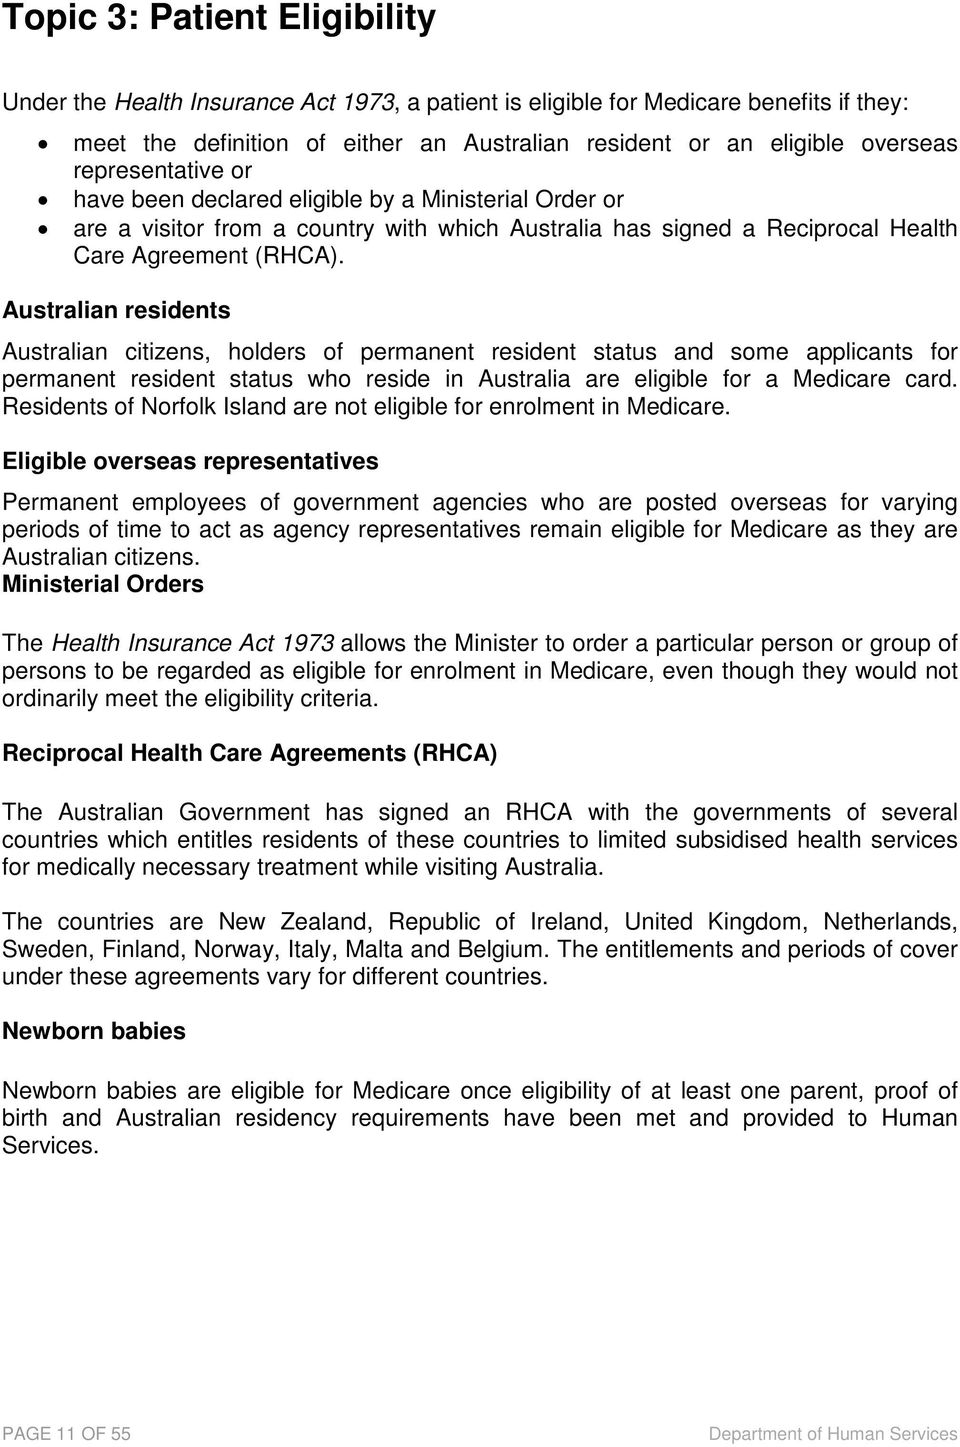 application for a medicare card for individual